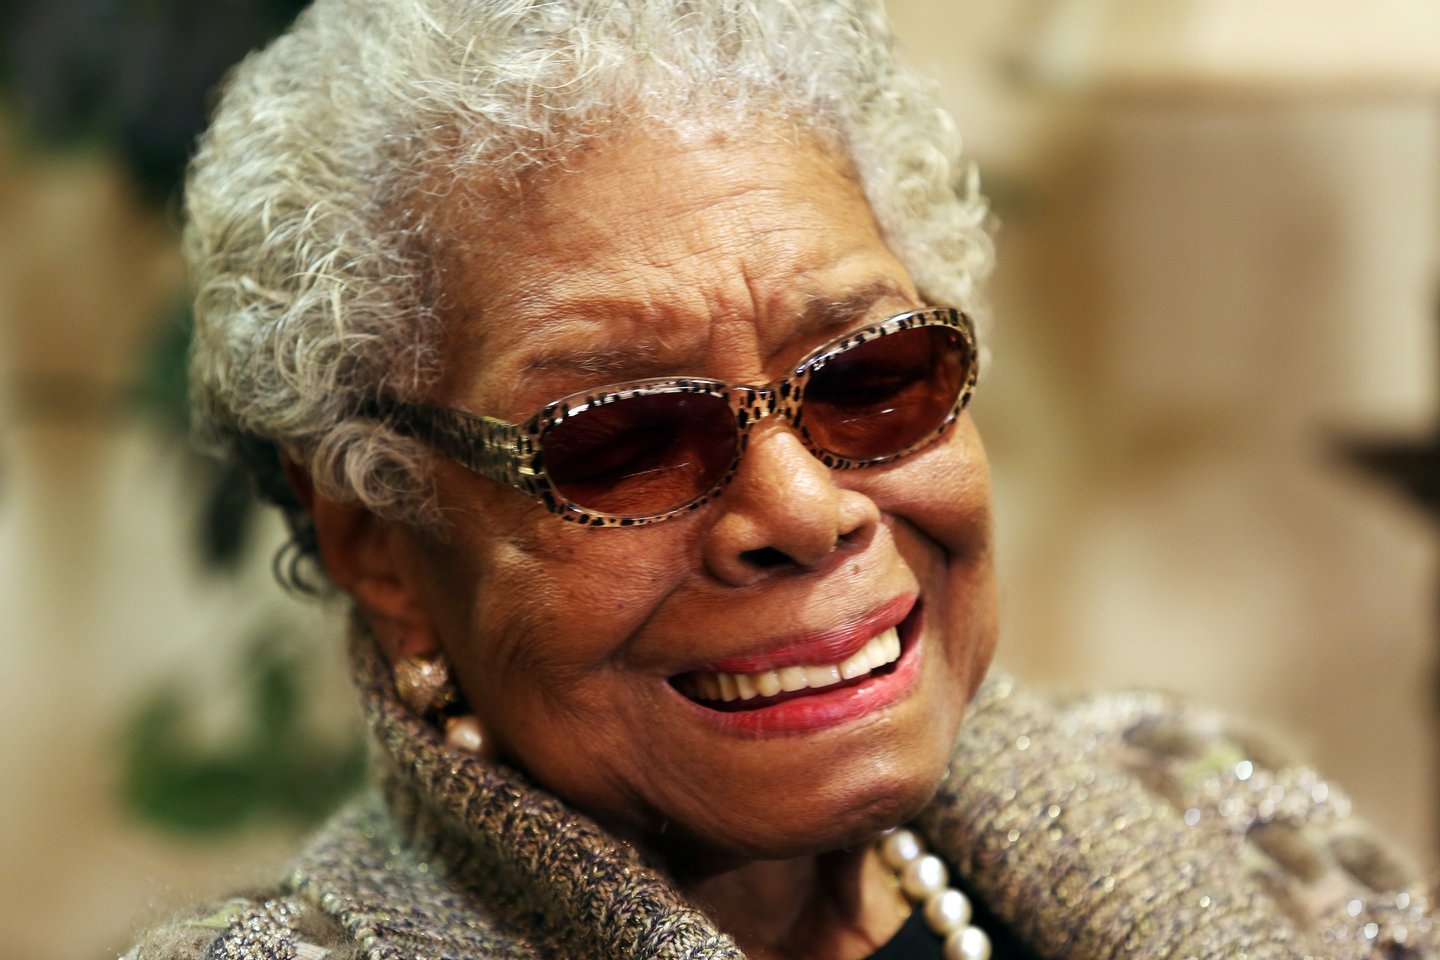 Iconic US author, activist Angelou hailed at memorial